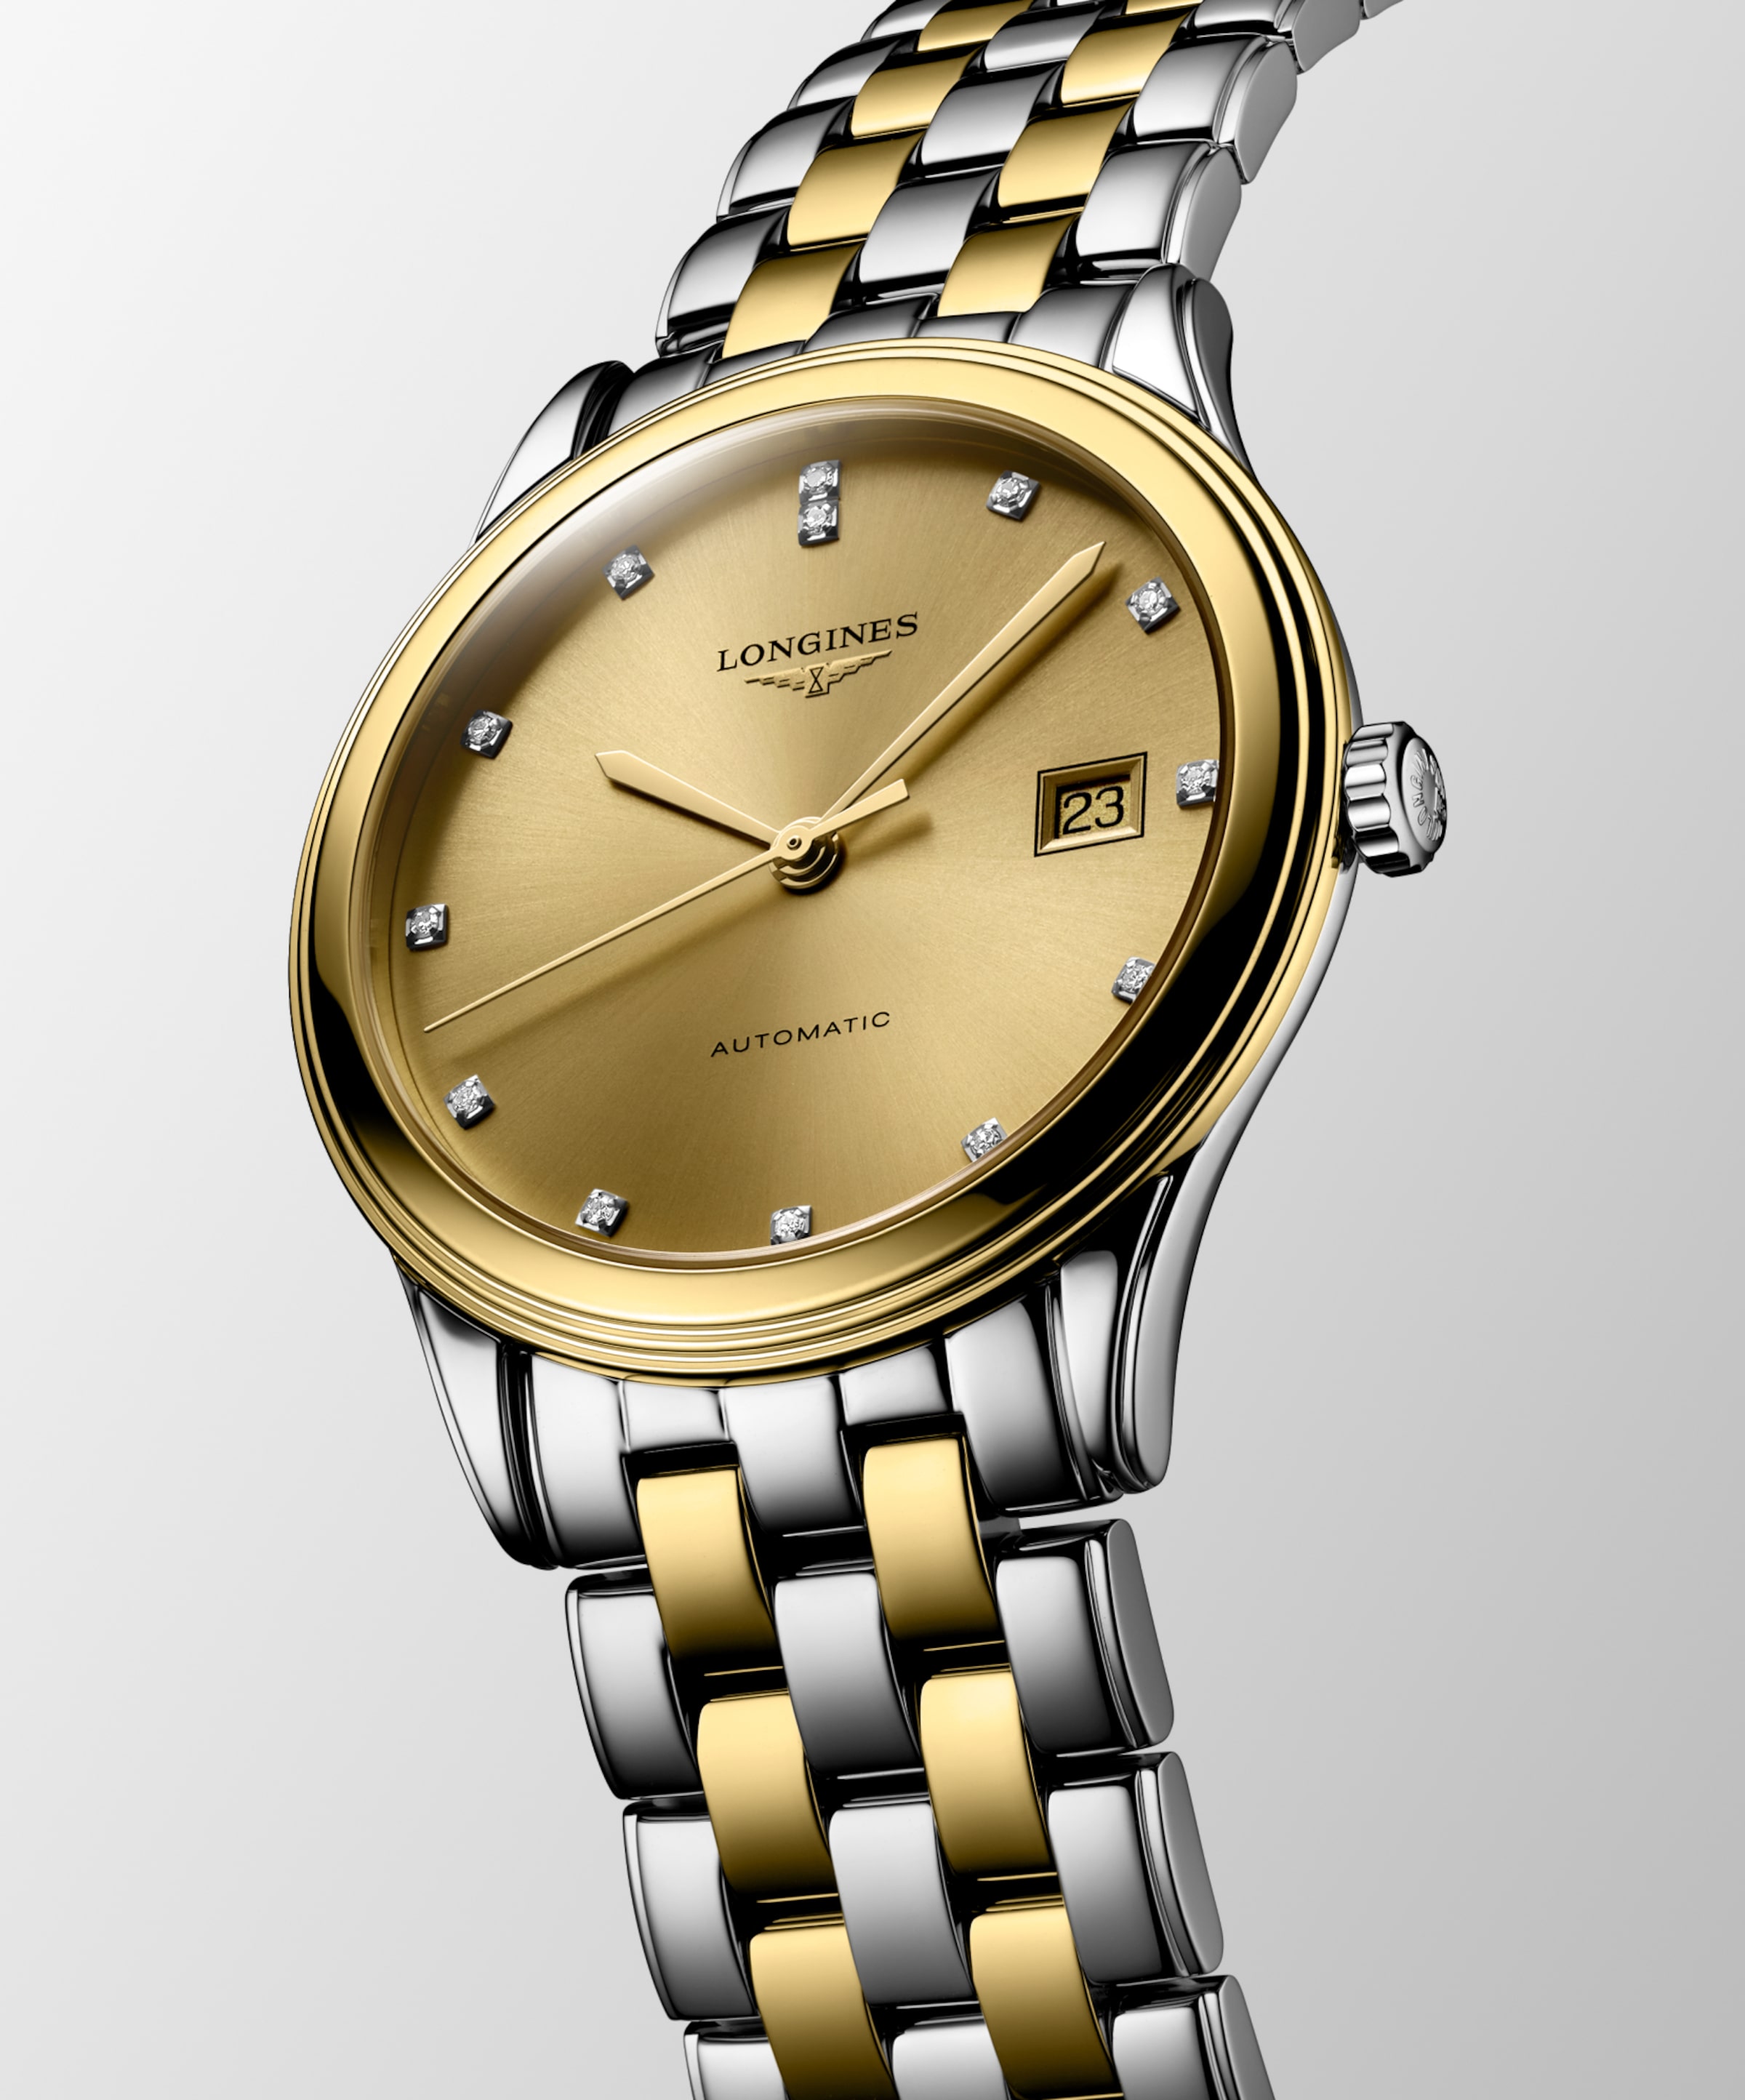 Longines FLAGSHIP Automatic Stainless steel and yellow PVD coating Watch - L4.974.3.37.7